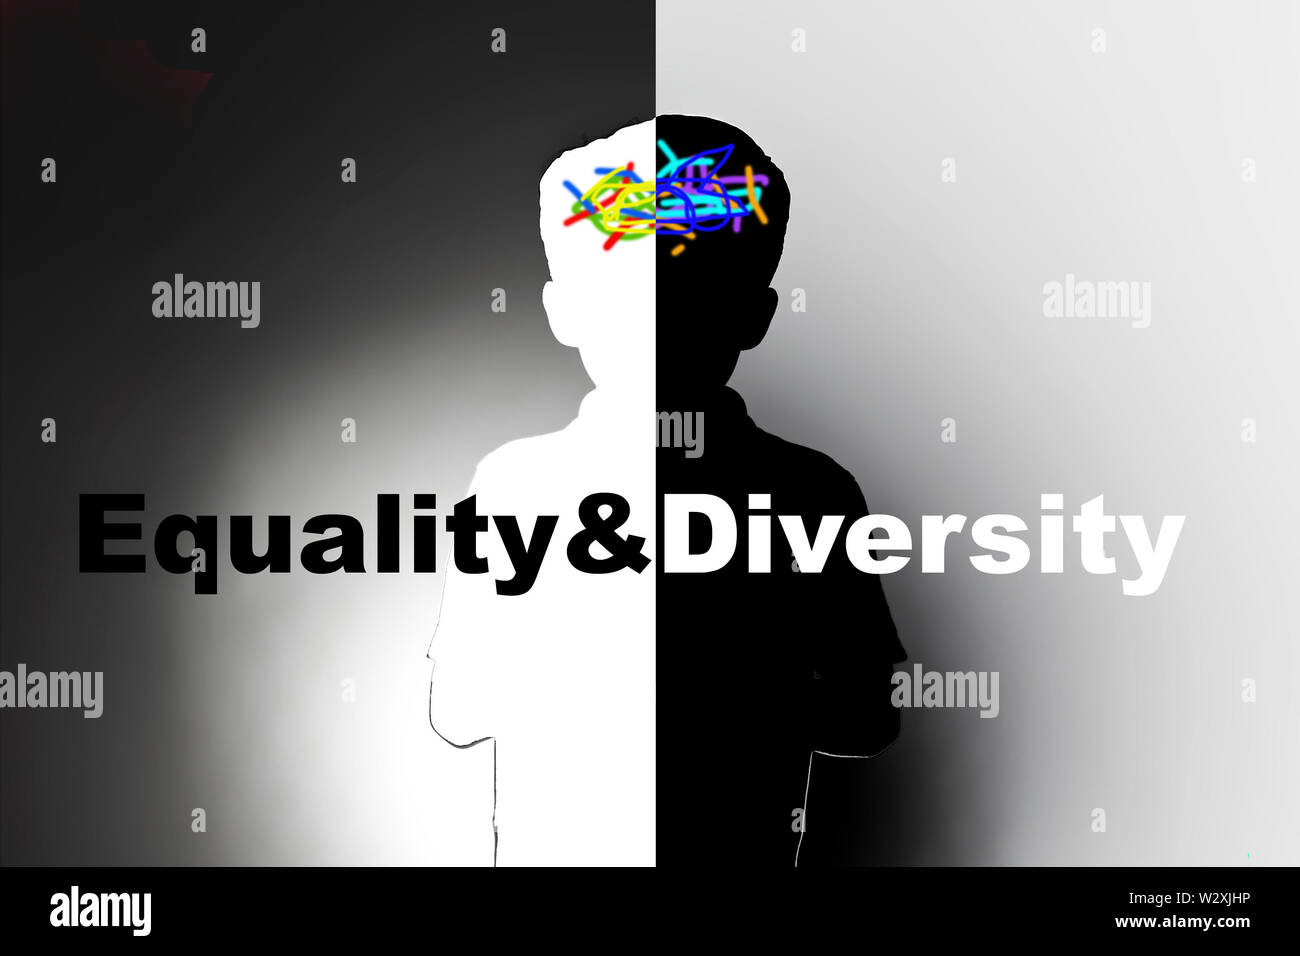 equality and diversity, mixed race children Stock Photo